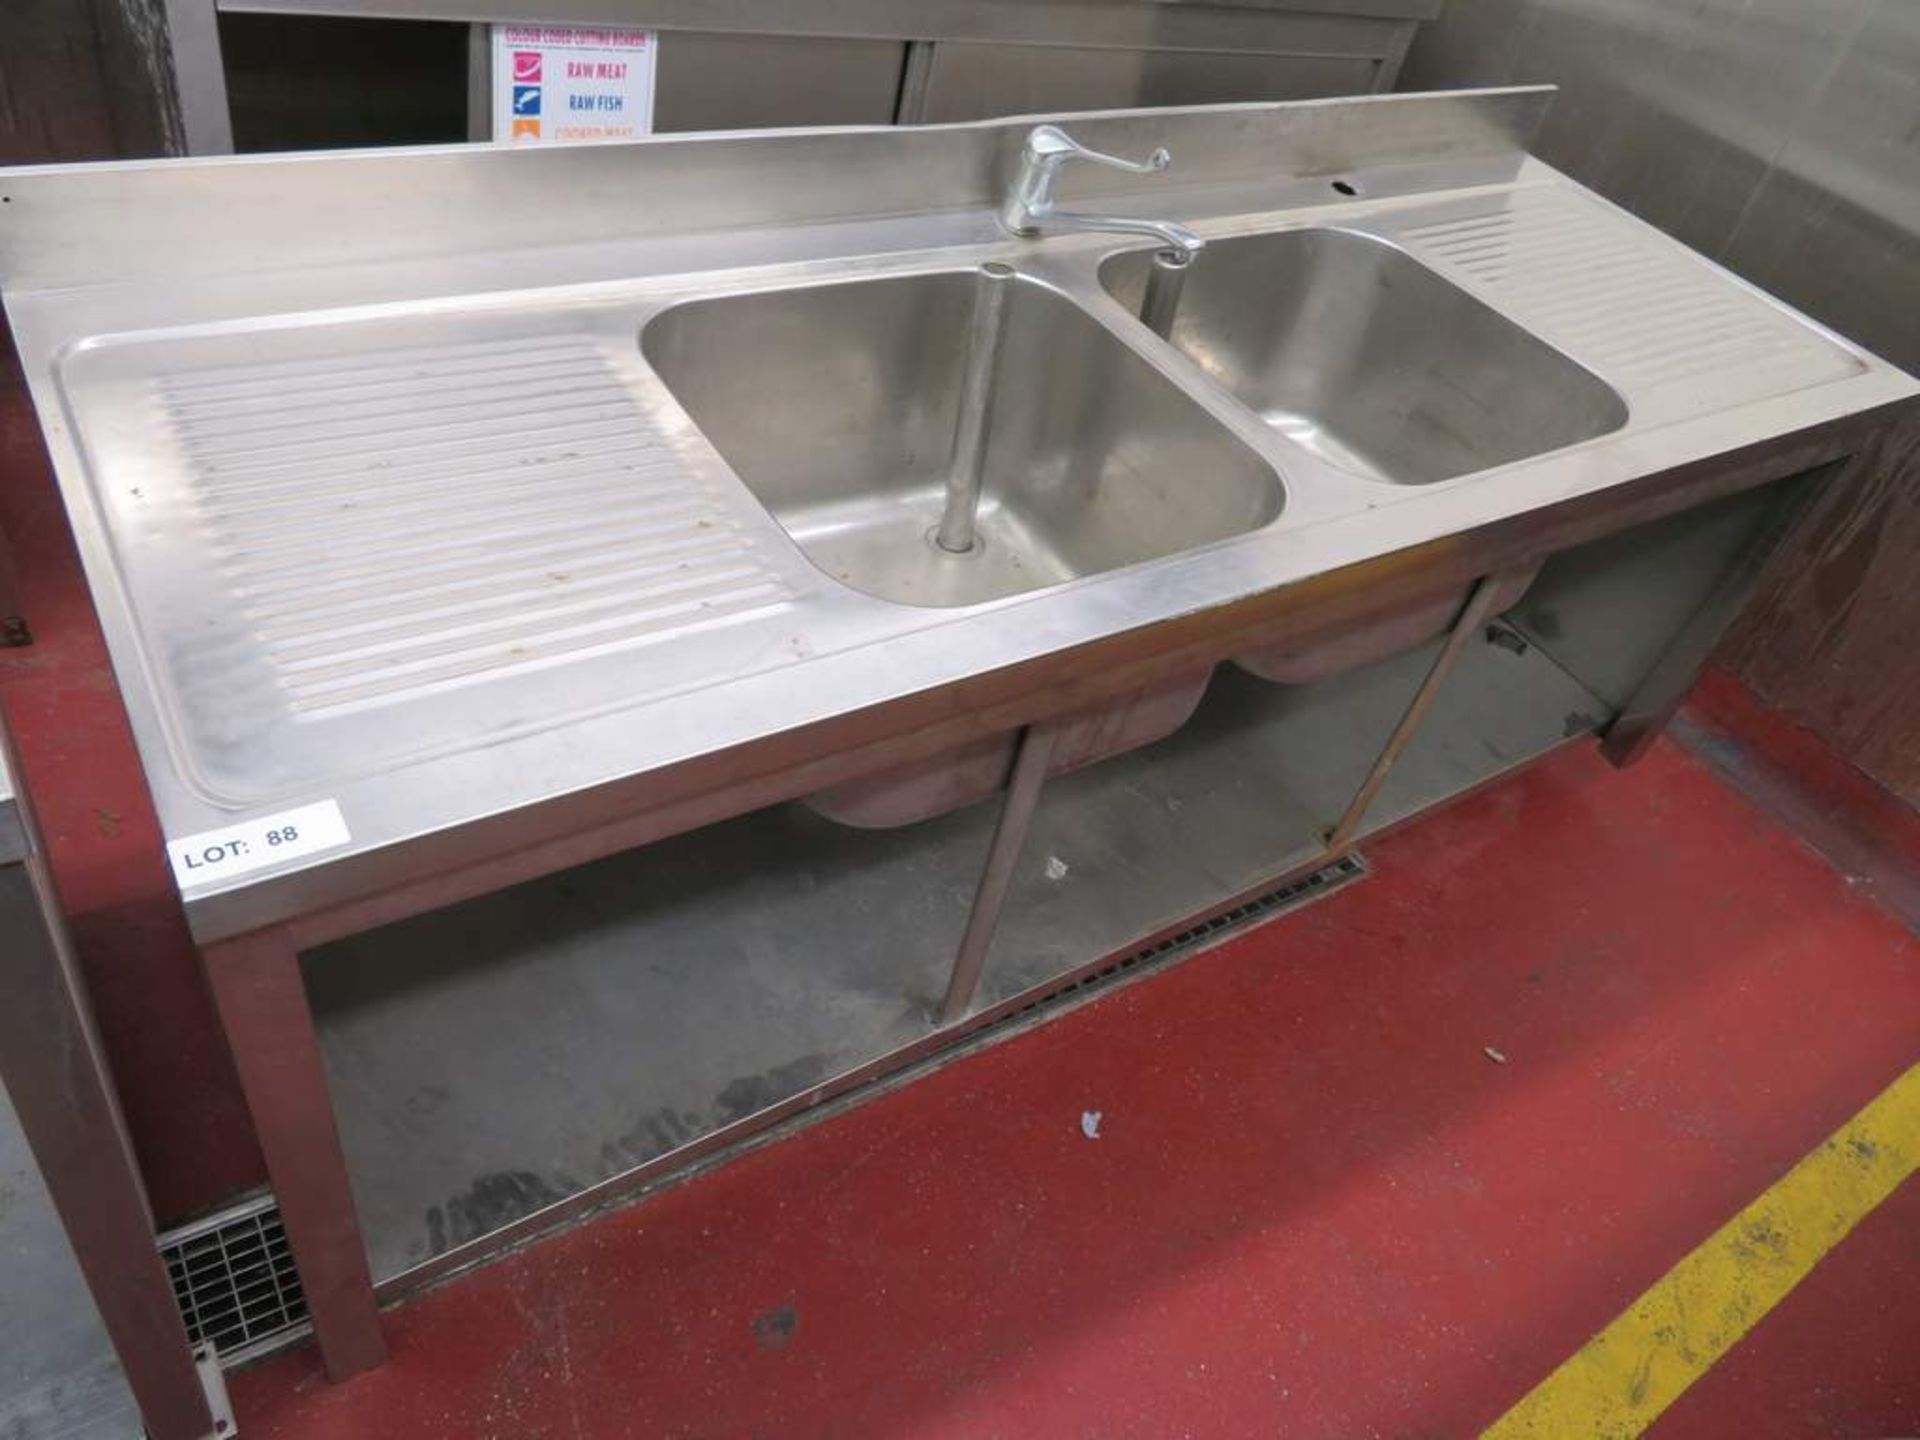 Large stainless steel twin basin sink unit with drainers